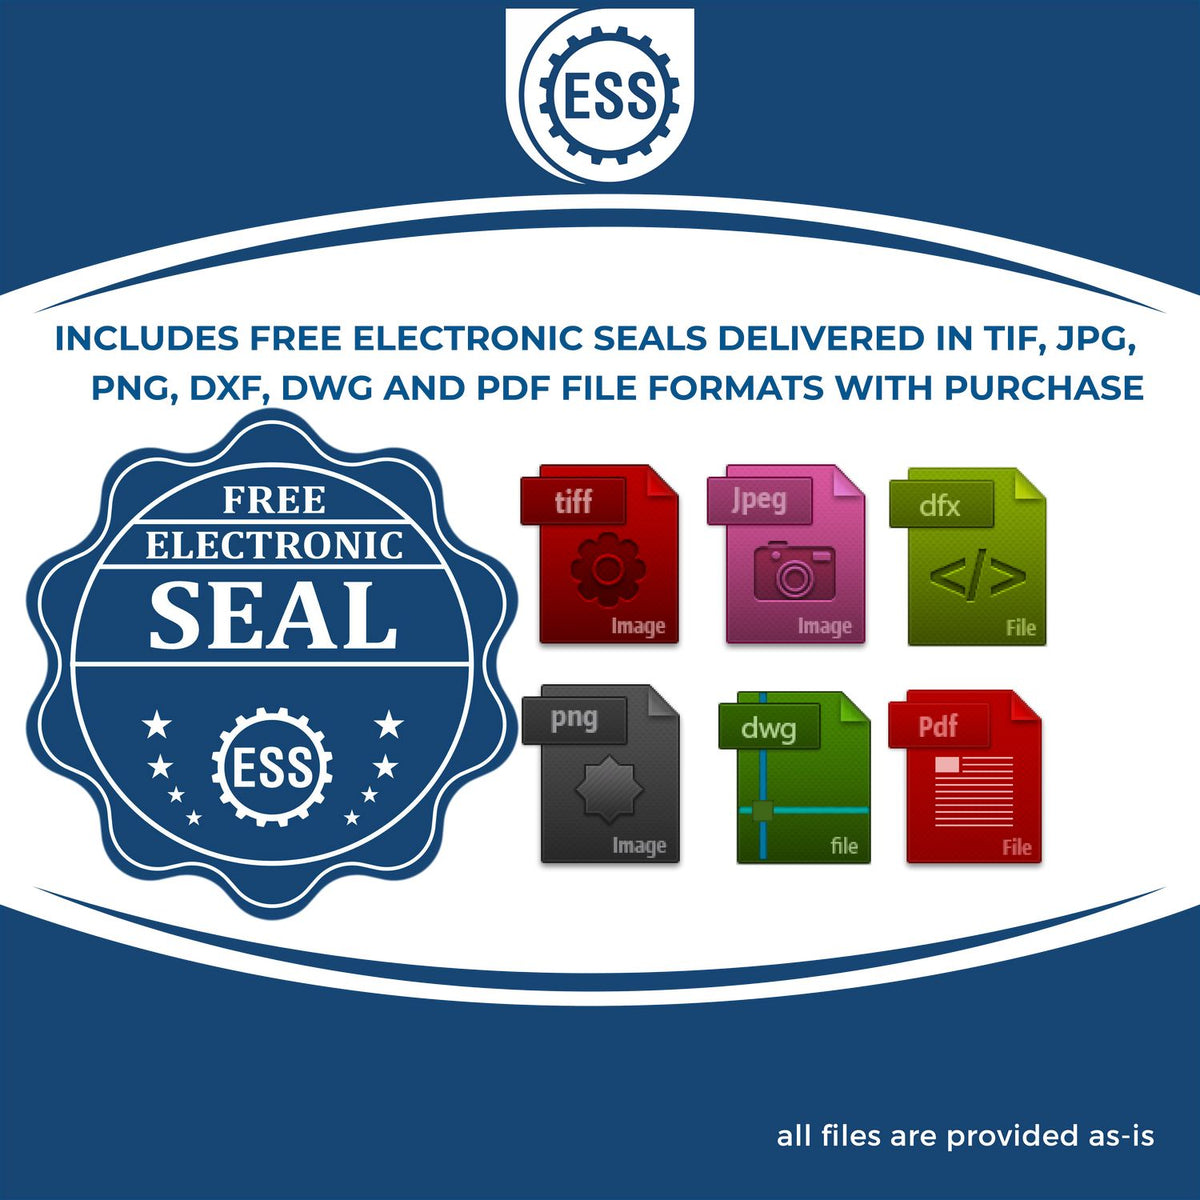 An infographic for the free electronic seal for the Long Reach Kansas Geology Seal illustrating the different file type icons such as DXF, DWG, TIF, JPG and PNG.